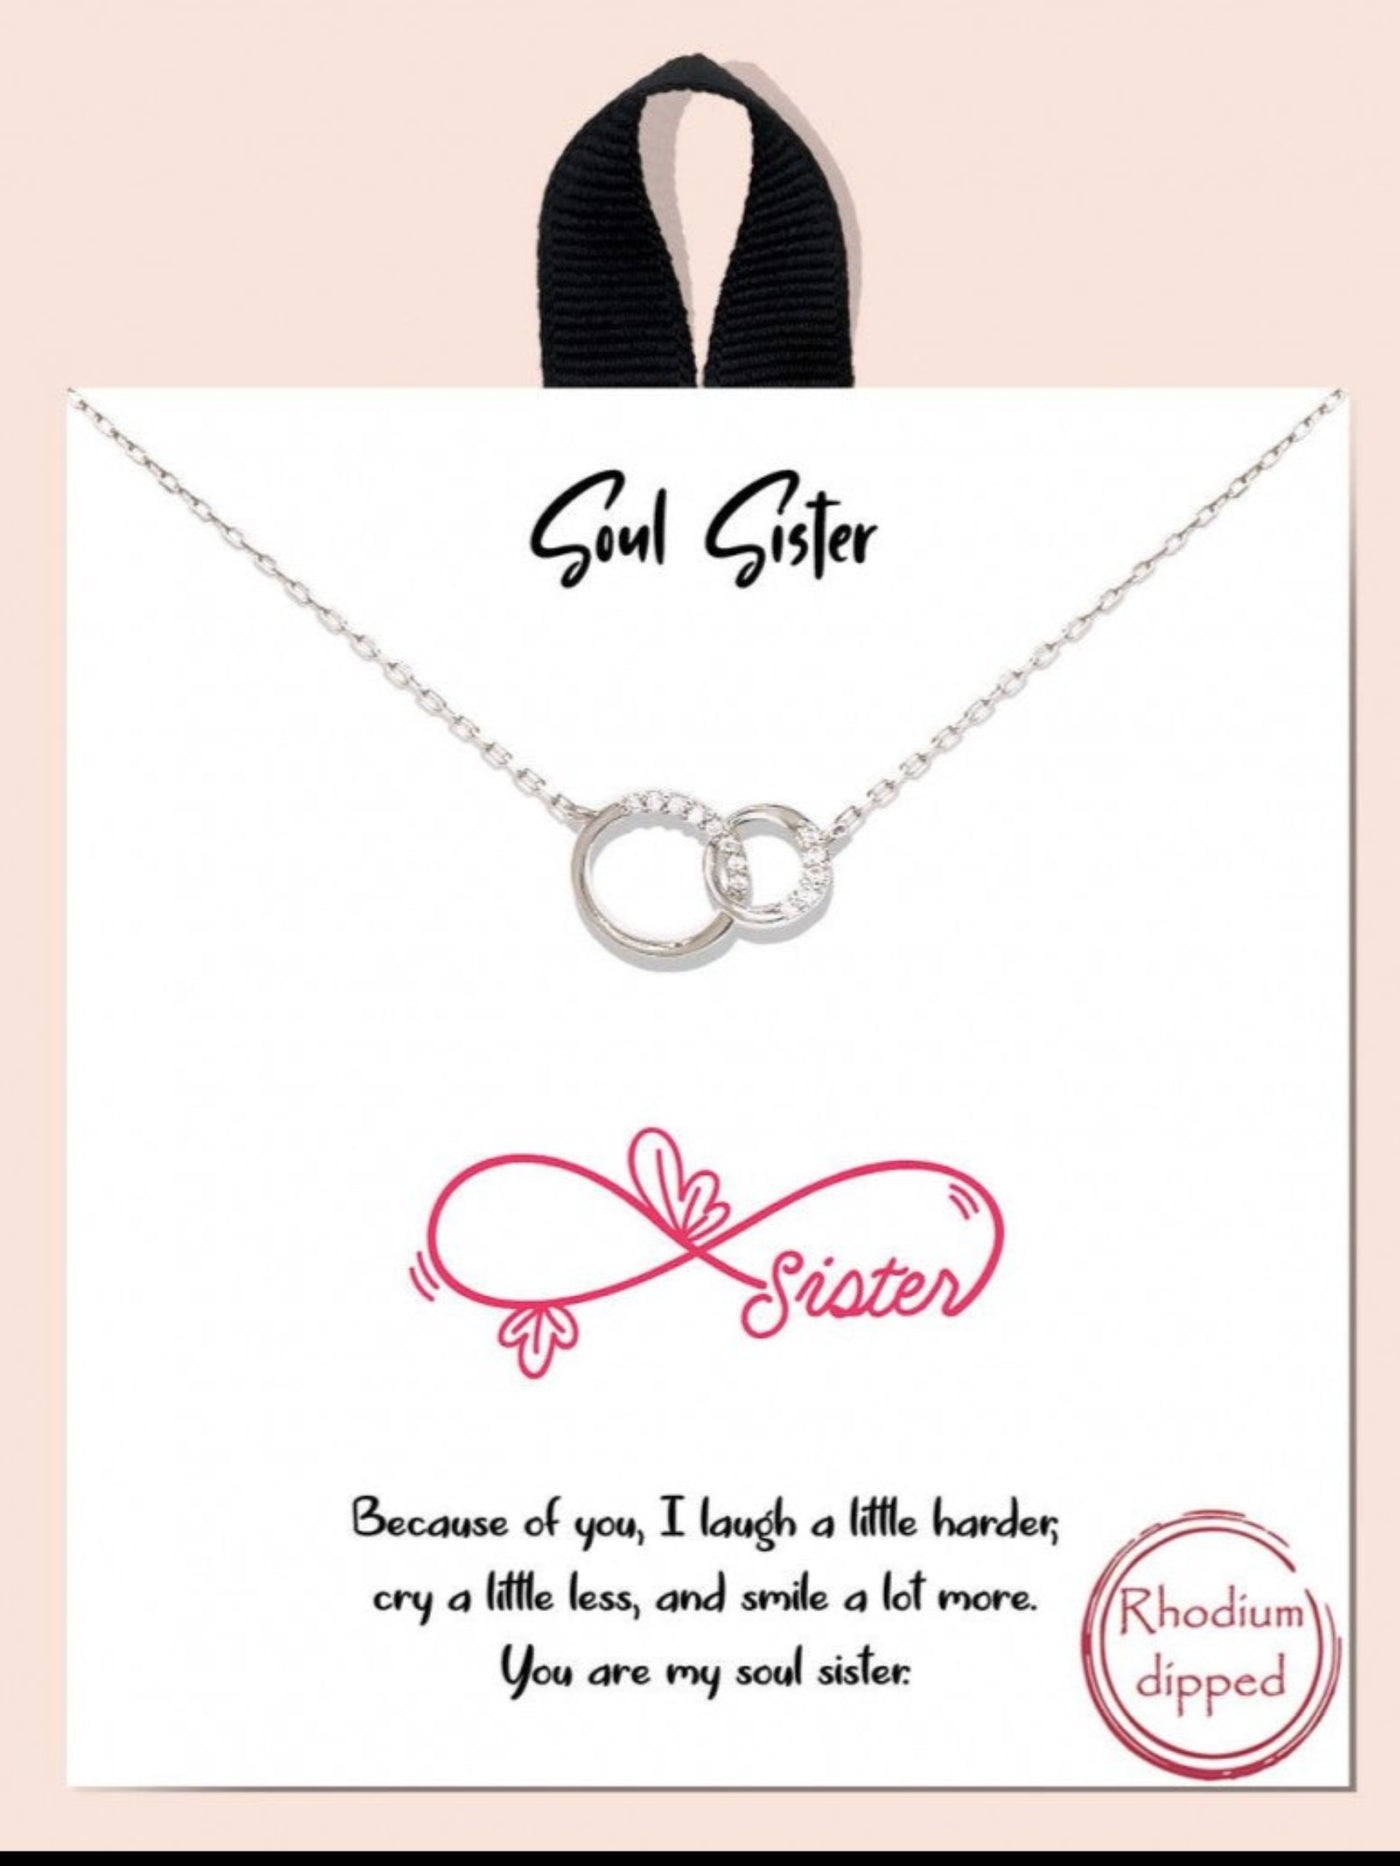 Soul Sister Necklace with CZ accent, Silver